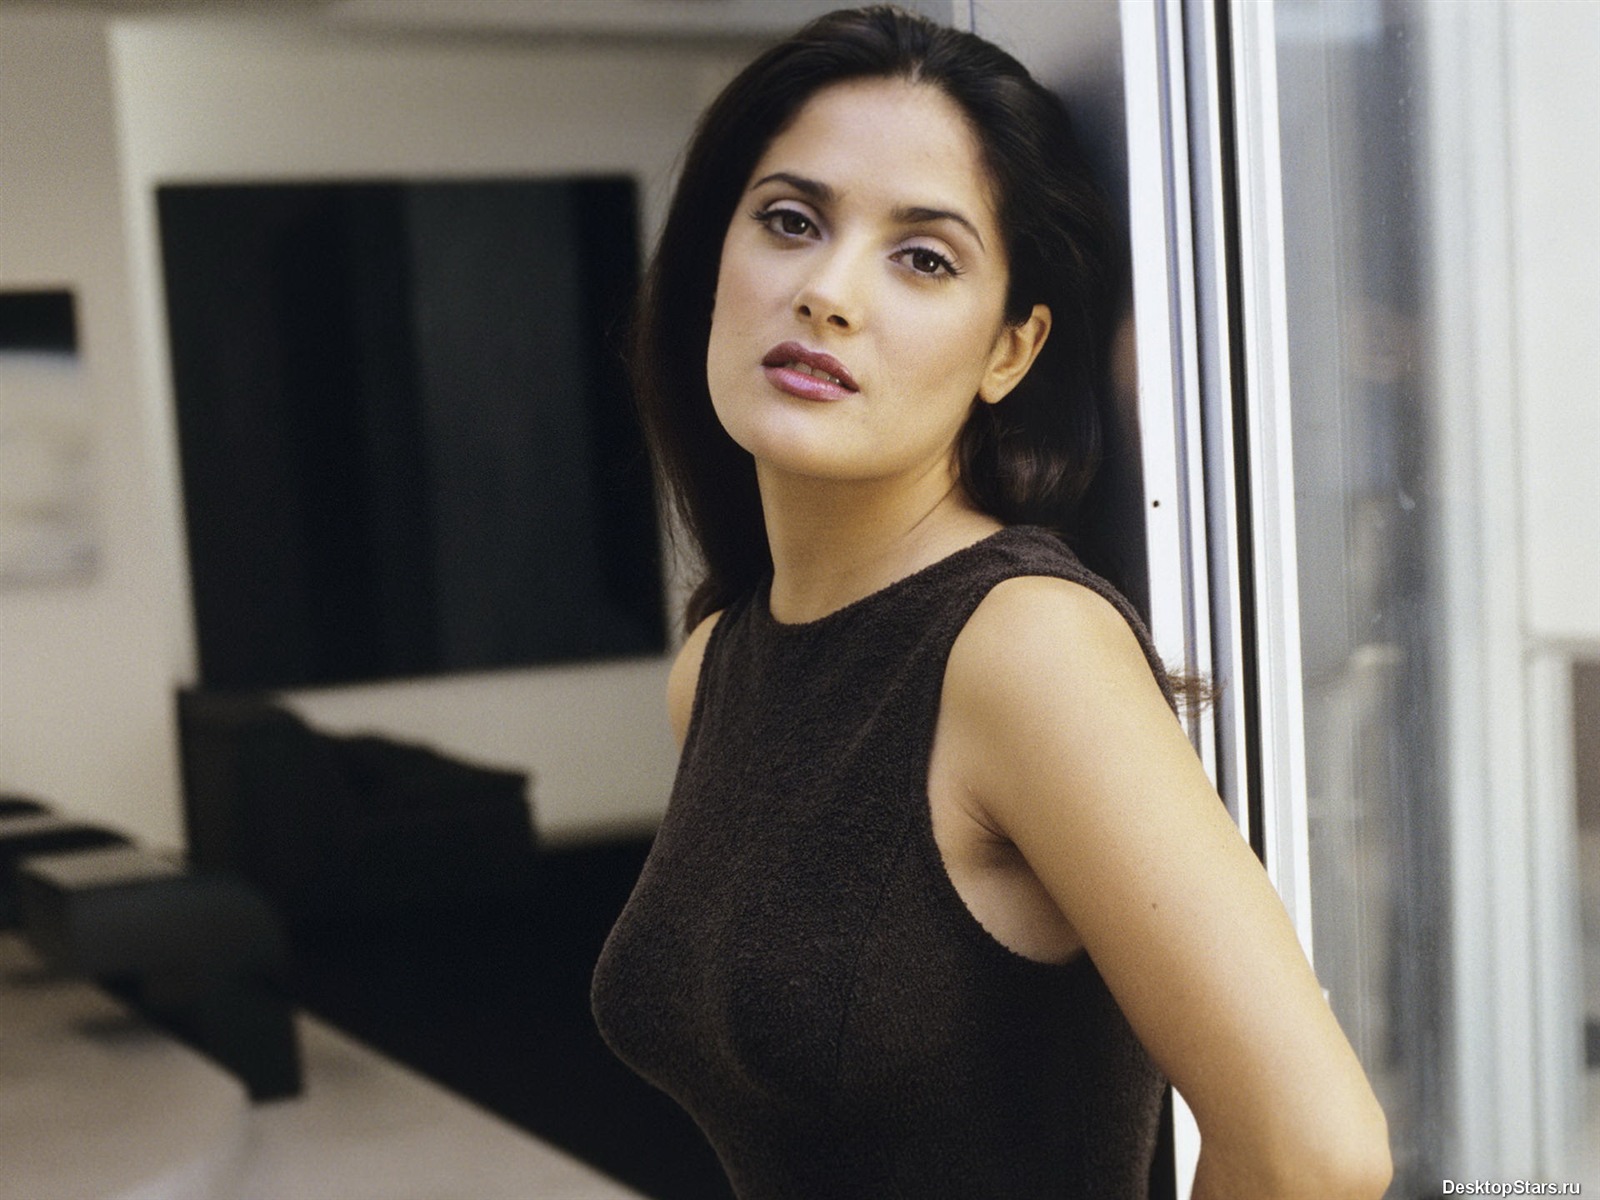 Salma Hayek #033 - 1600x1200 Wallpapers Pictures Photos Images